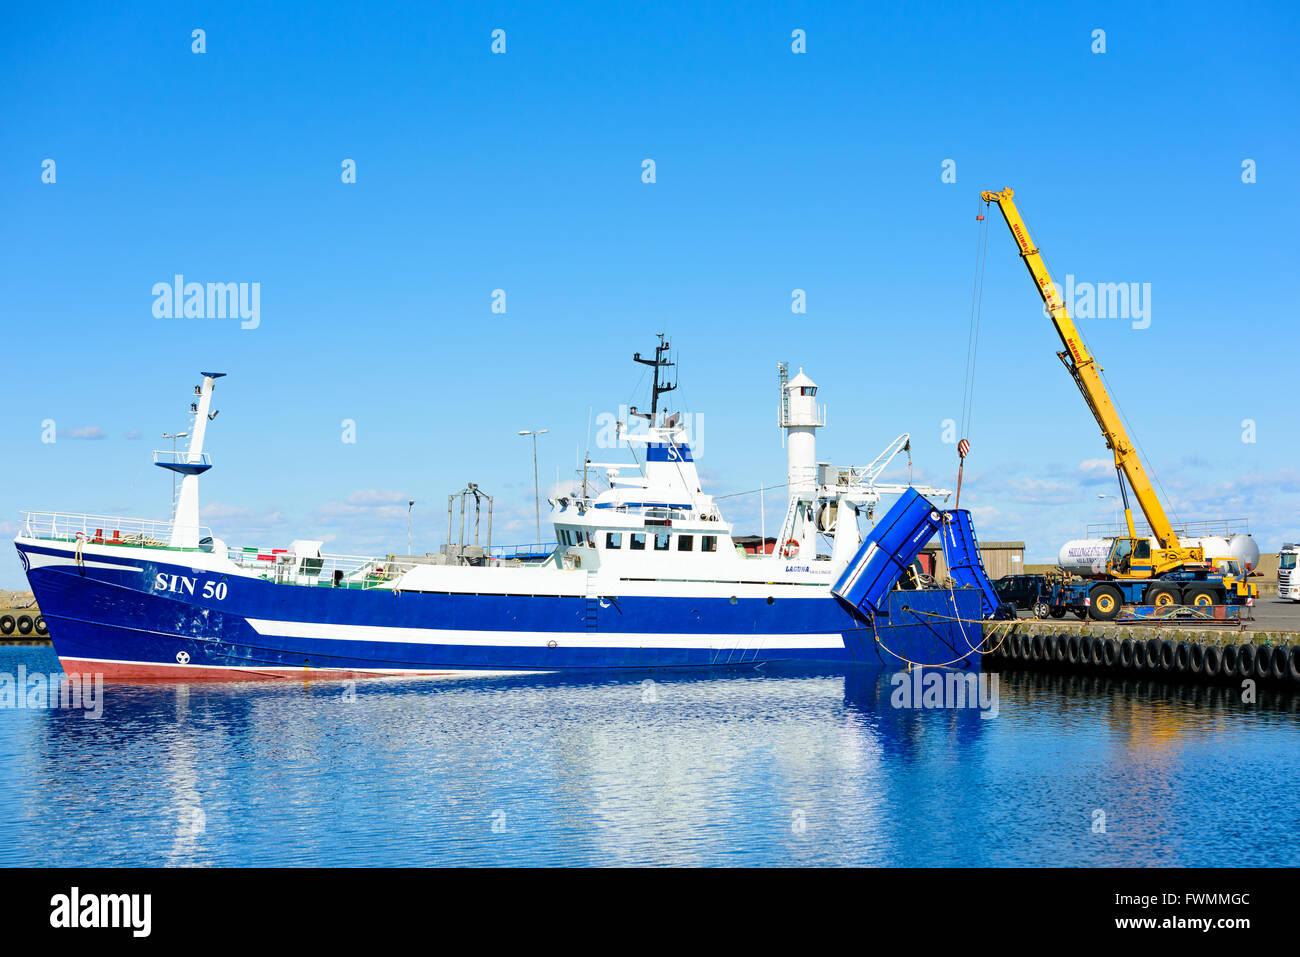 Simrishamn, Sweden - April 1, 2016: Yellow Liebherr mobile crane lifting a blue trawler wing off the ground at port. Normal work Stock Photo